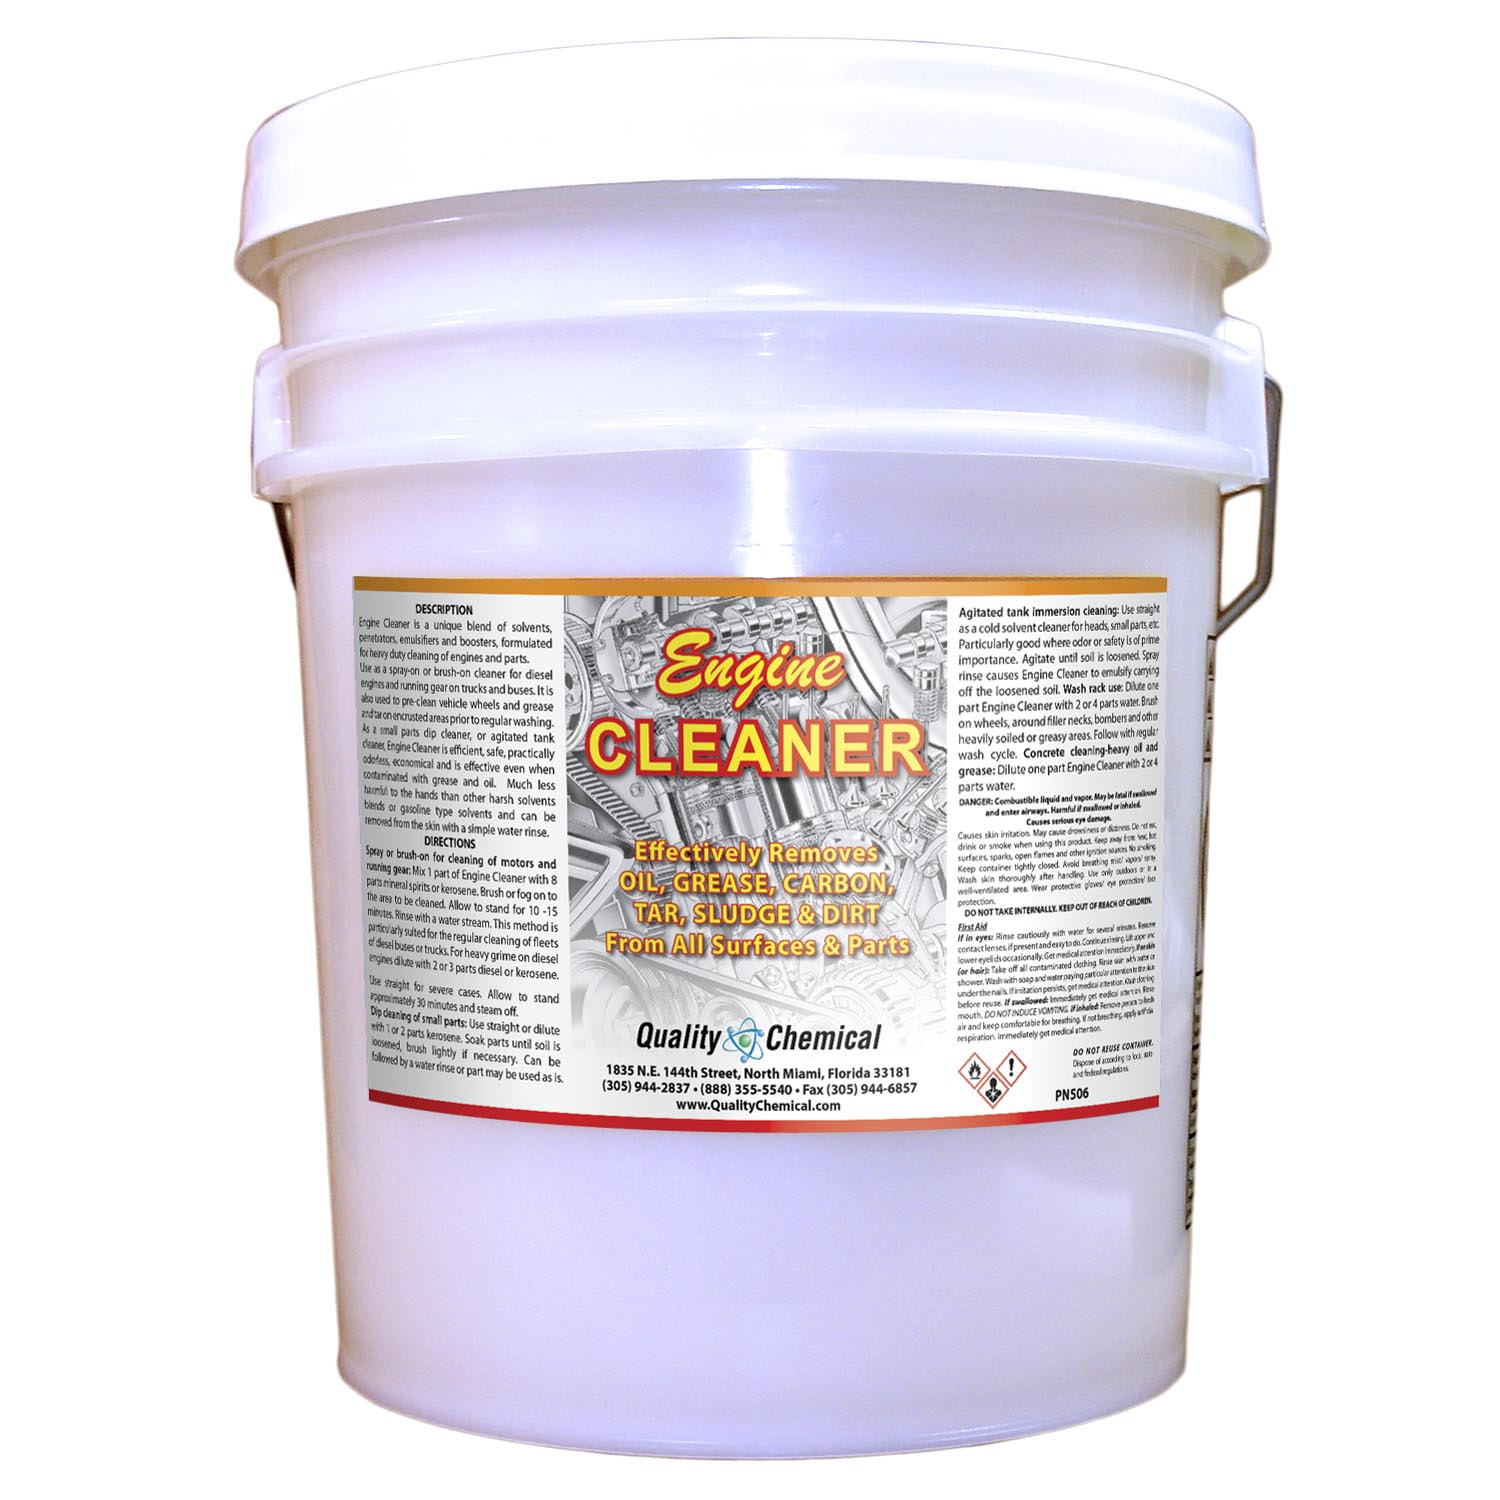 https://www.qualitychemical.com/shared/images/products/ChemicalsNew/QCC_506_Engine_cleaner_5g.jpg